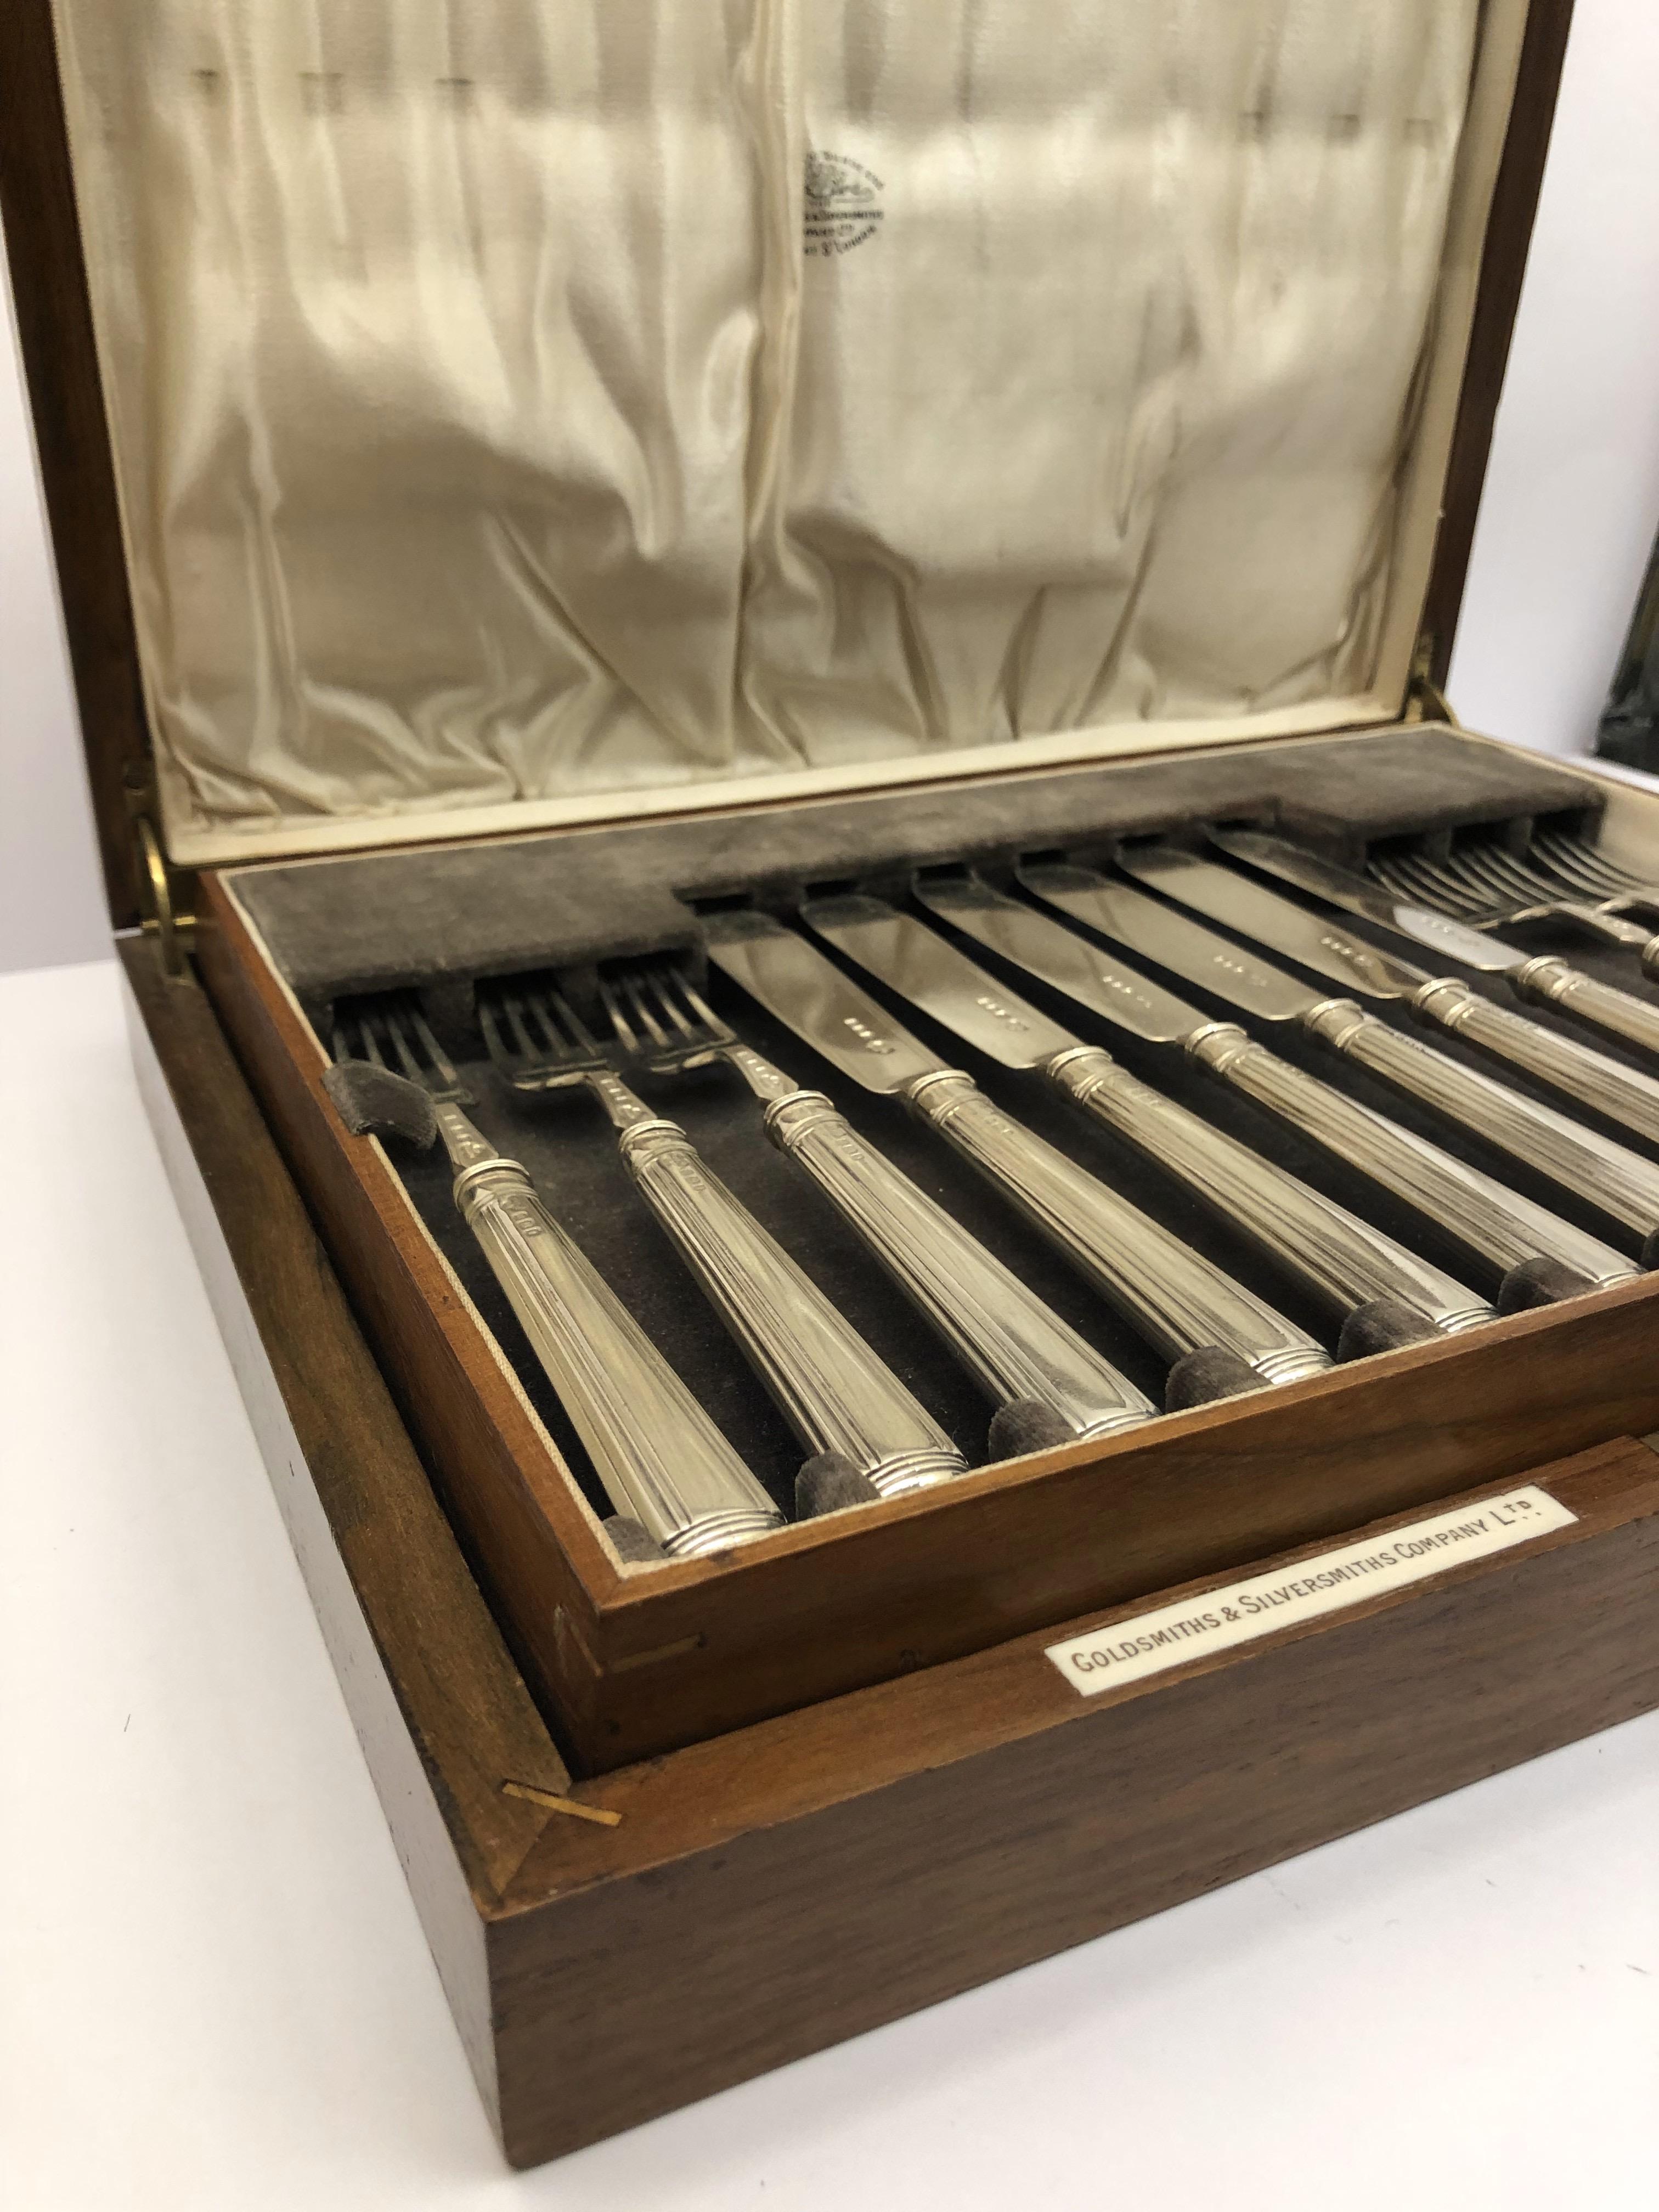 A sterling silver 12 piece silver cutlery set by Goldsmiths & Silversmiths London. England, 1928. 

The set comprises of 6 forks and 6 knives.